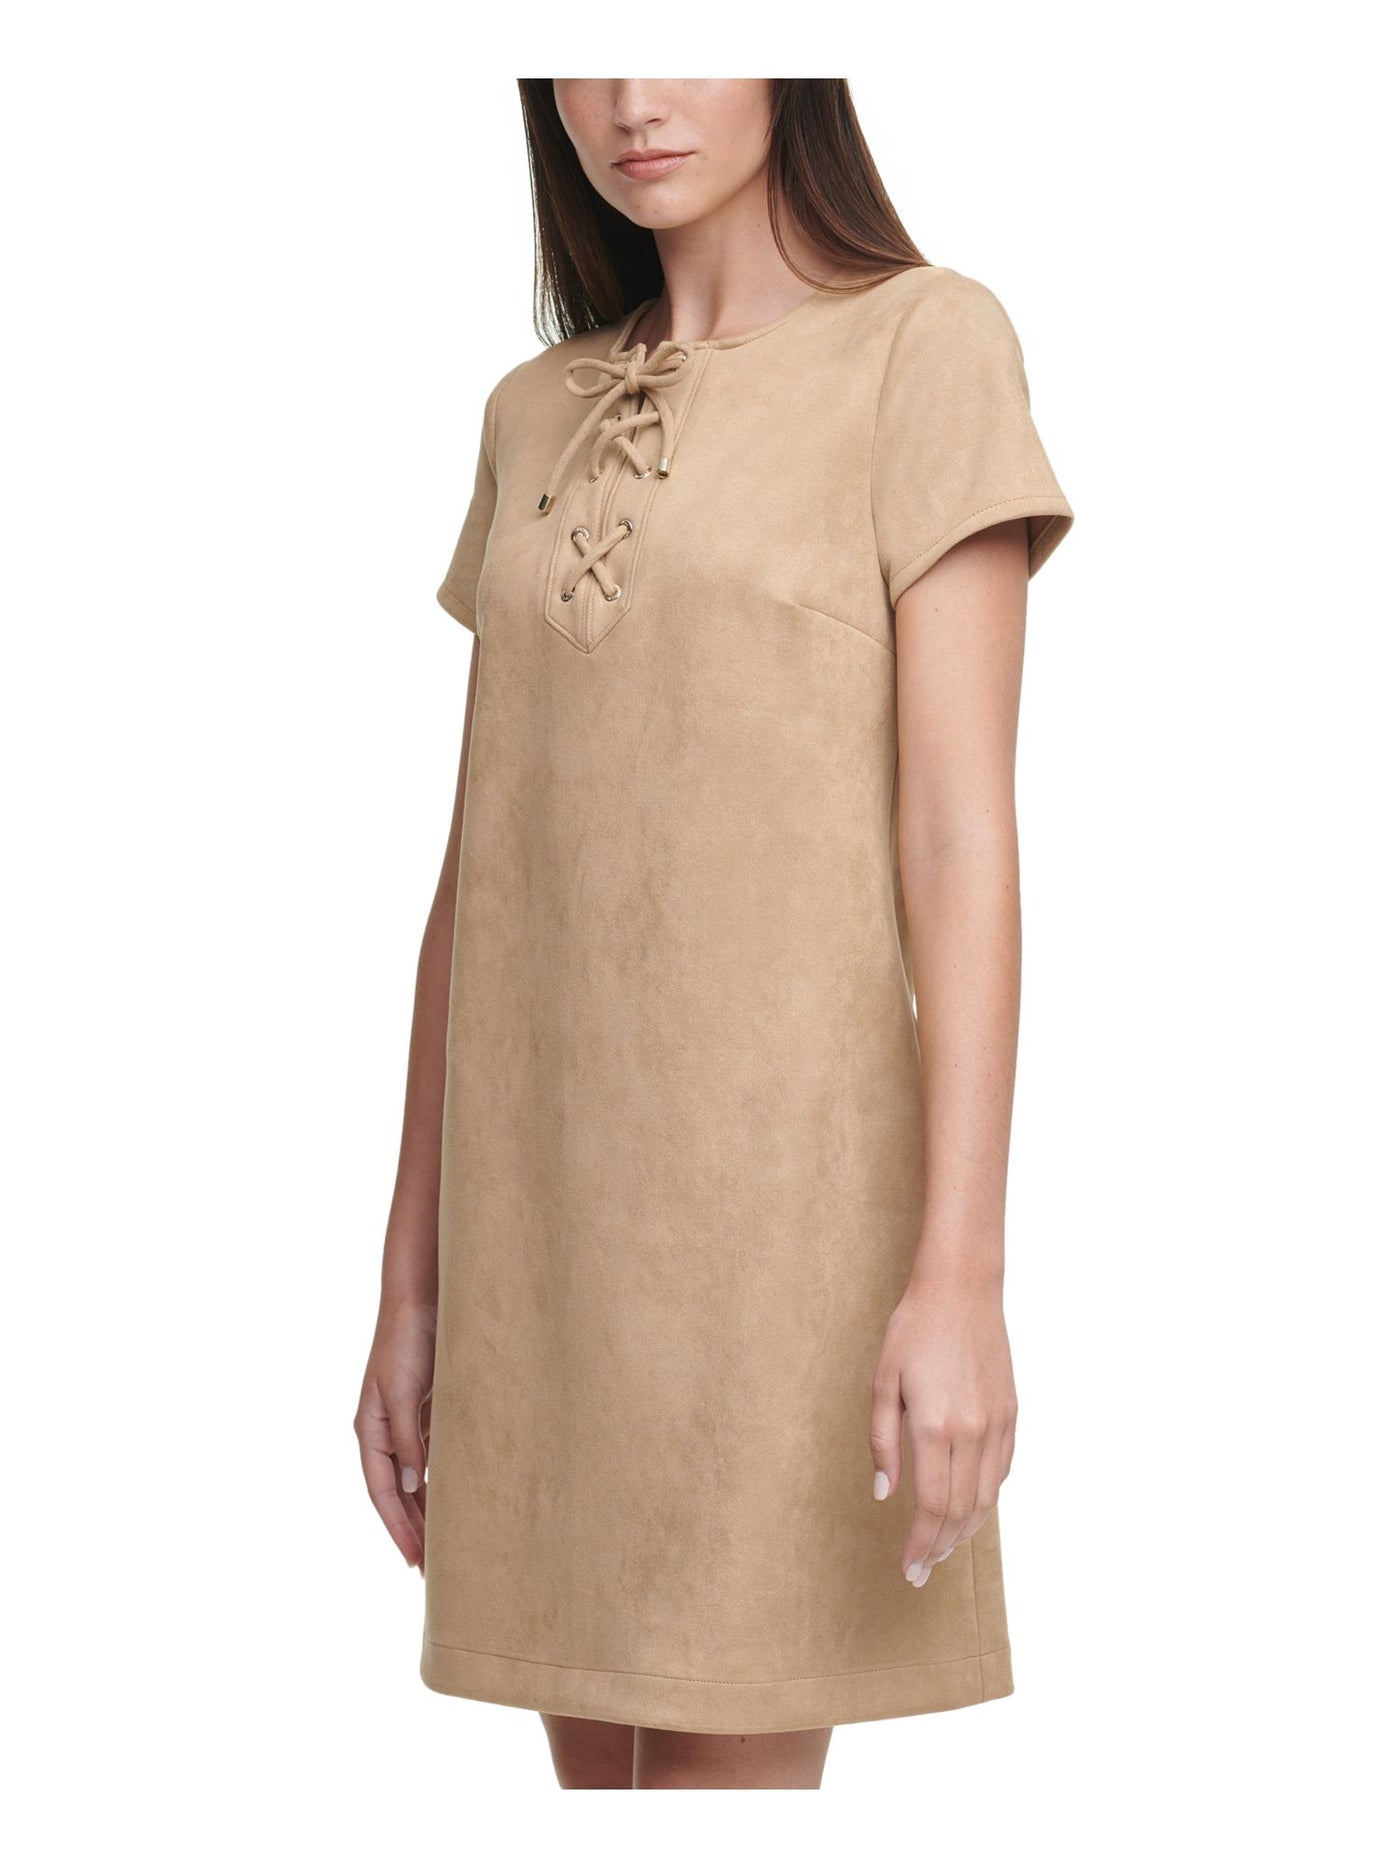 TOMMY HILFIGER Womens Brown Faux Suede Short Sleeve Jewel Neck Above The Knee Shift Dress 8